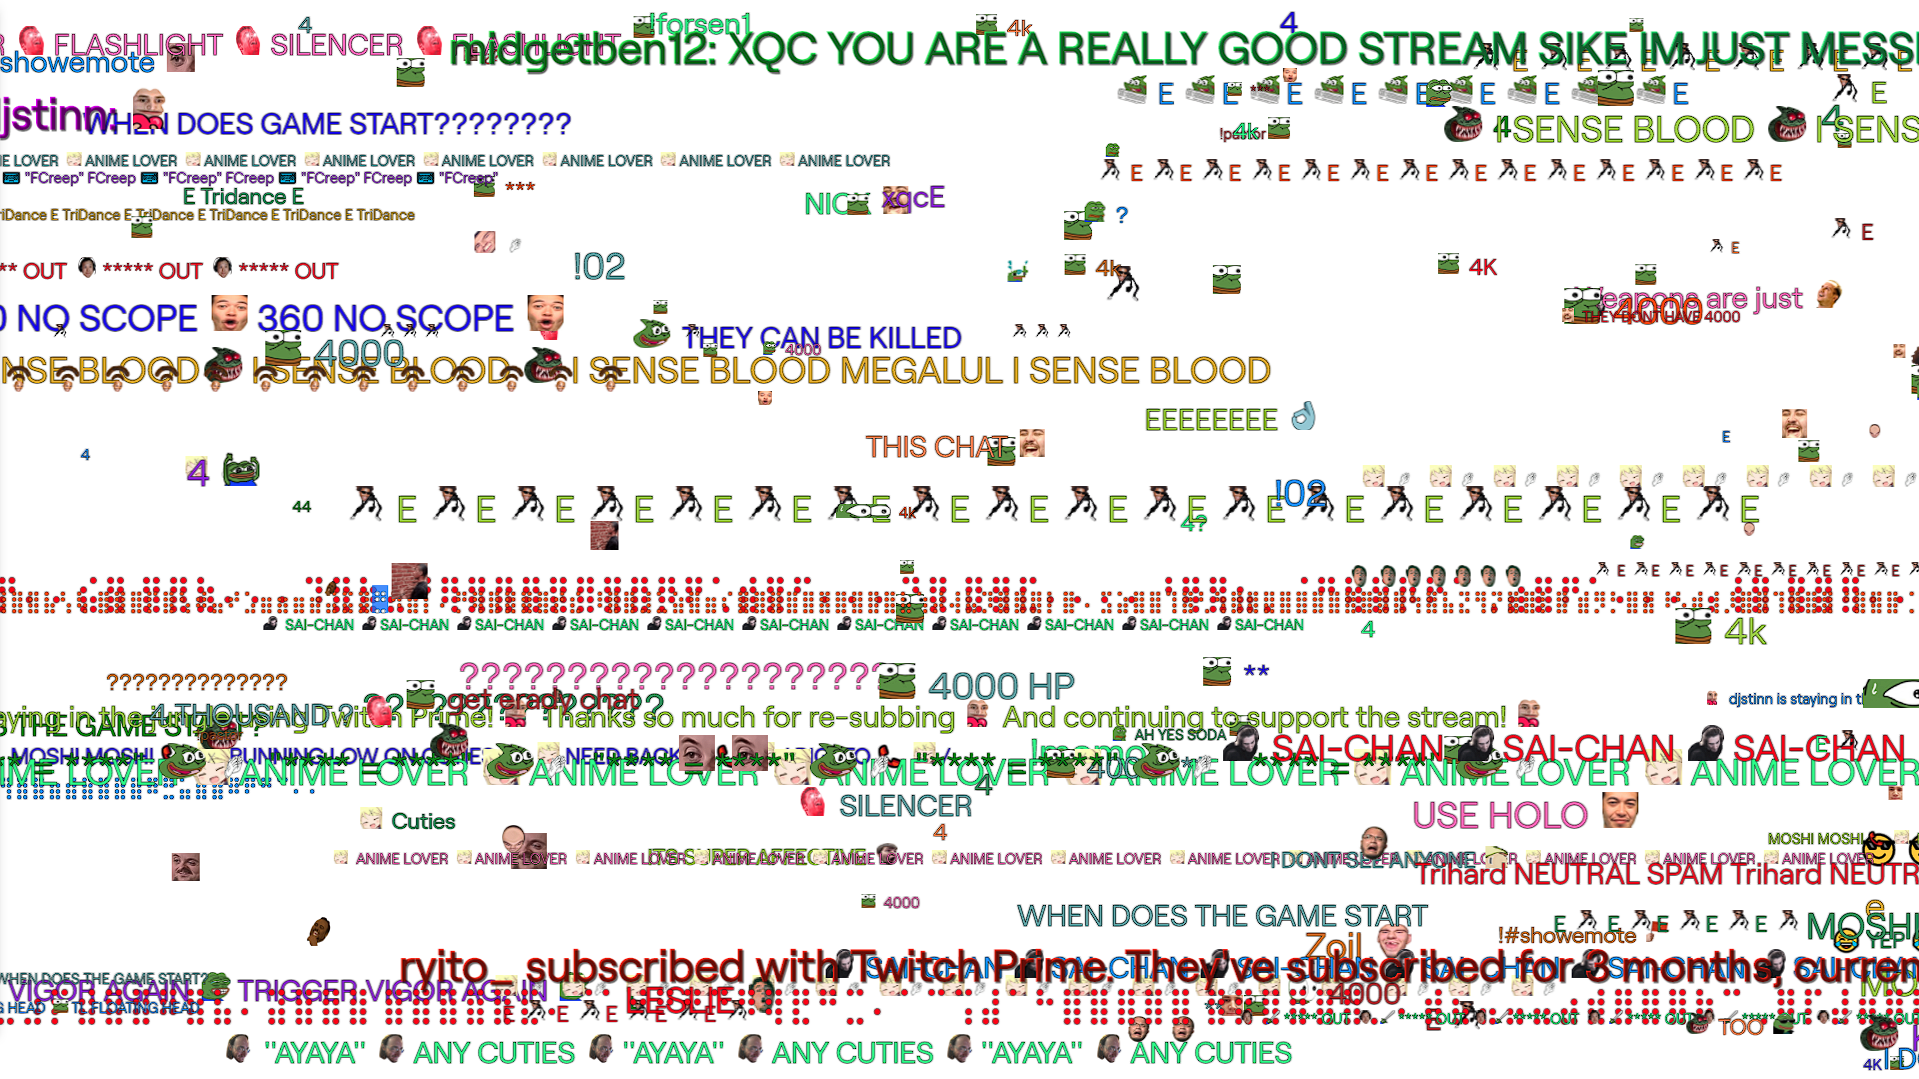 Perplex Chat displaying Twitch messages, in different seeded colors.